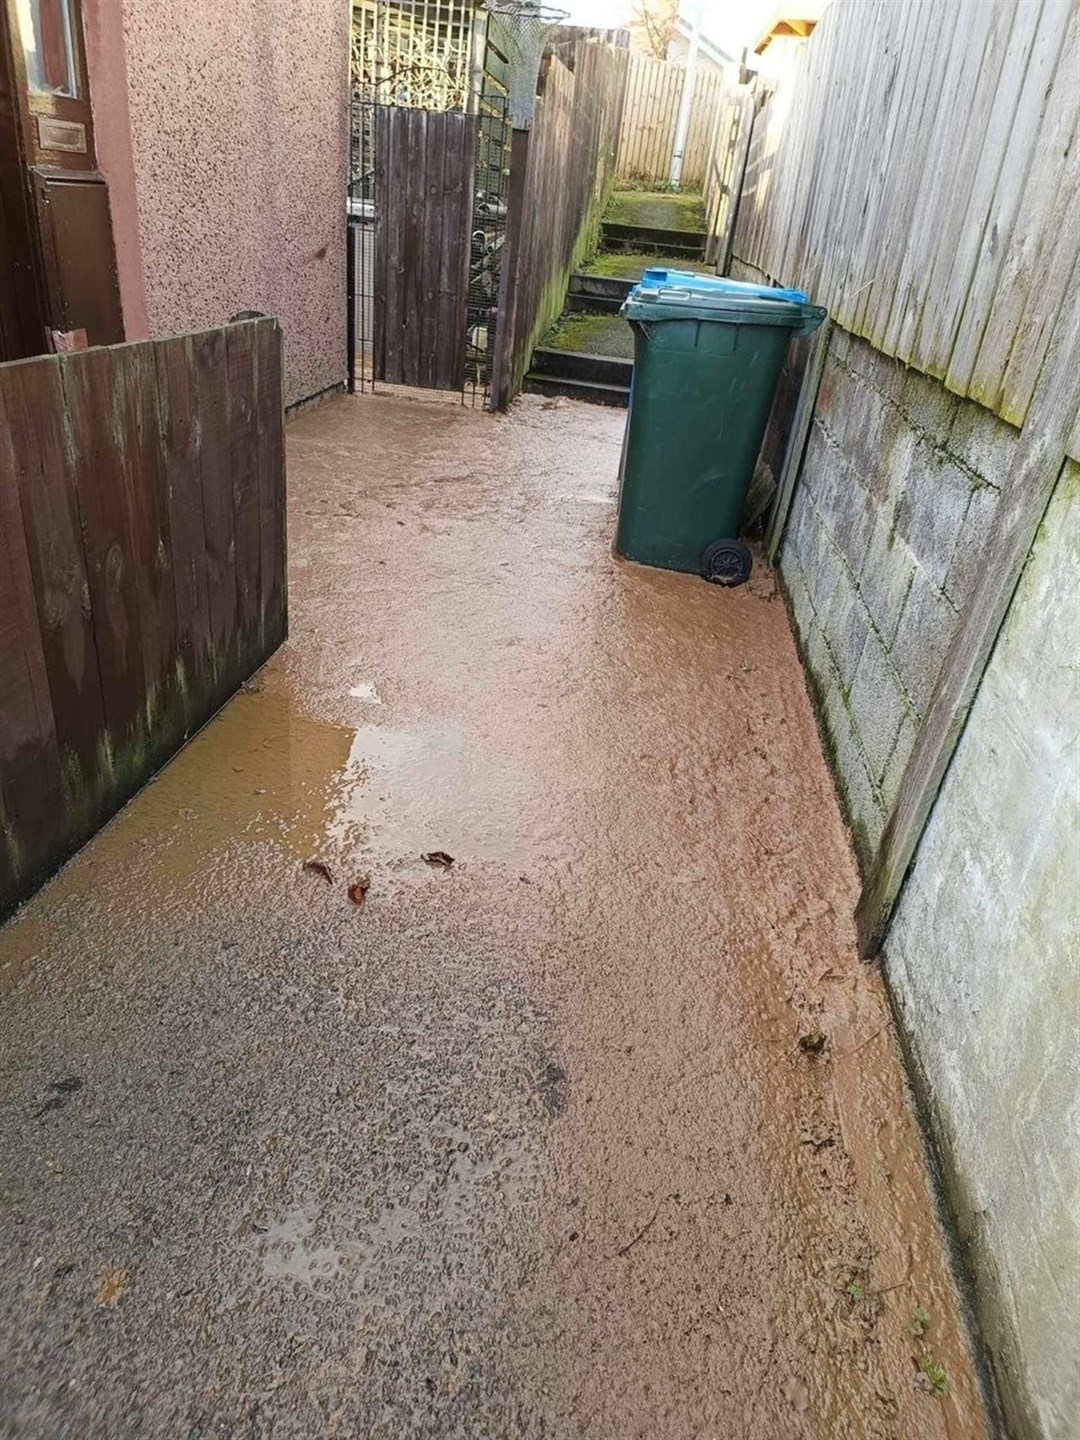 Some of the sewage has entered the pathway of this property in Burnside.